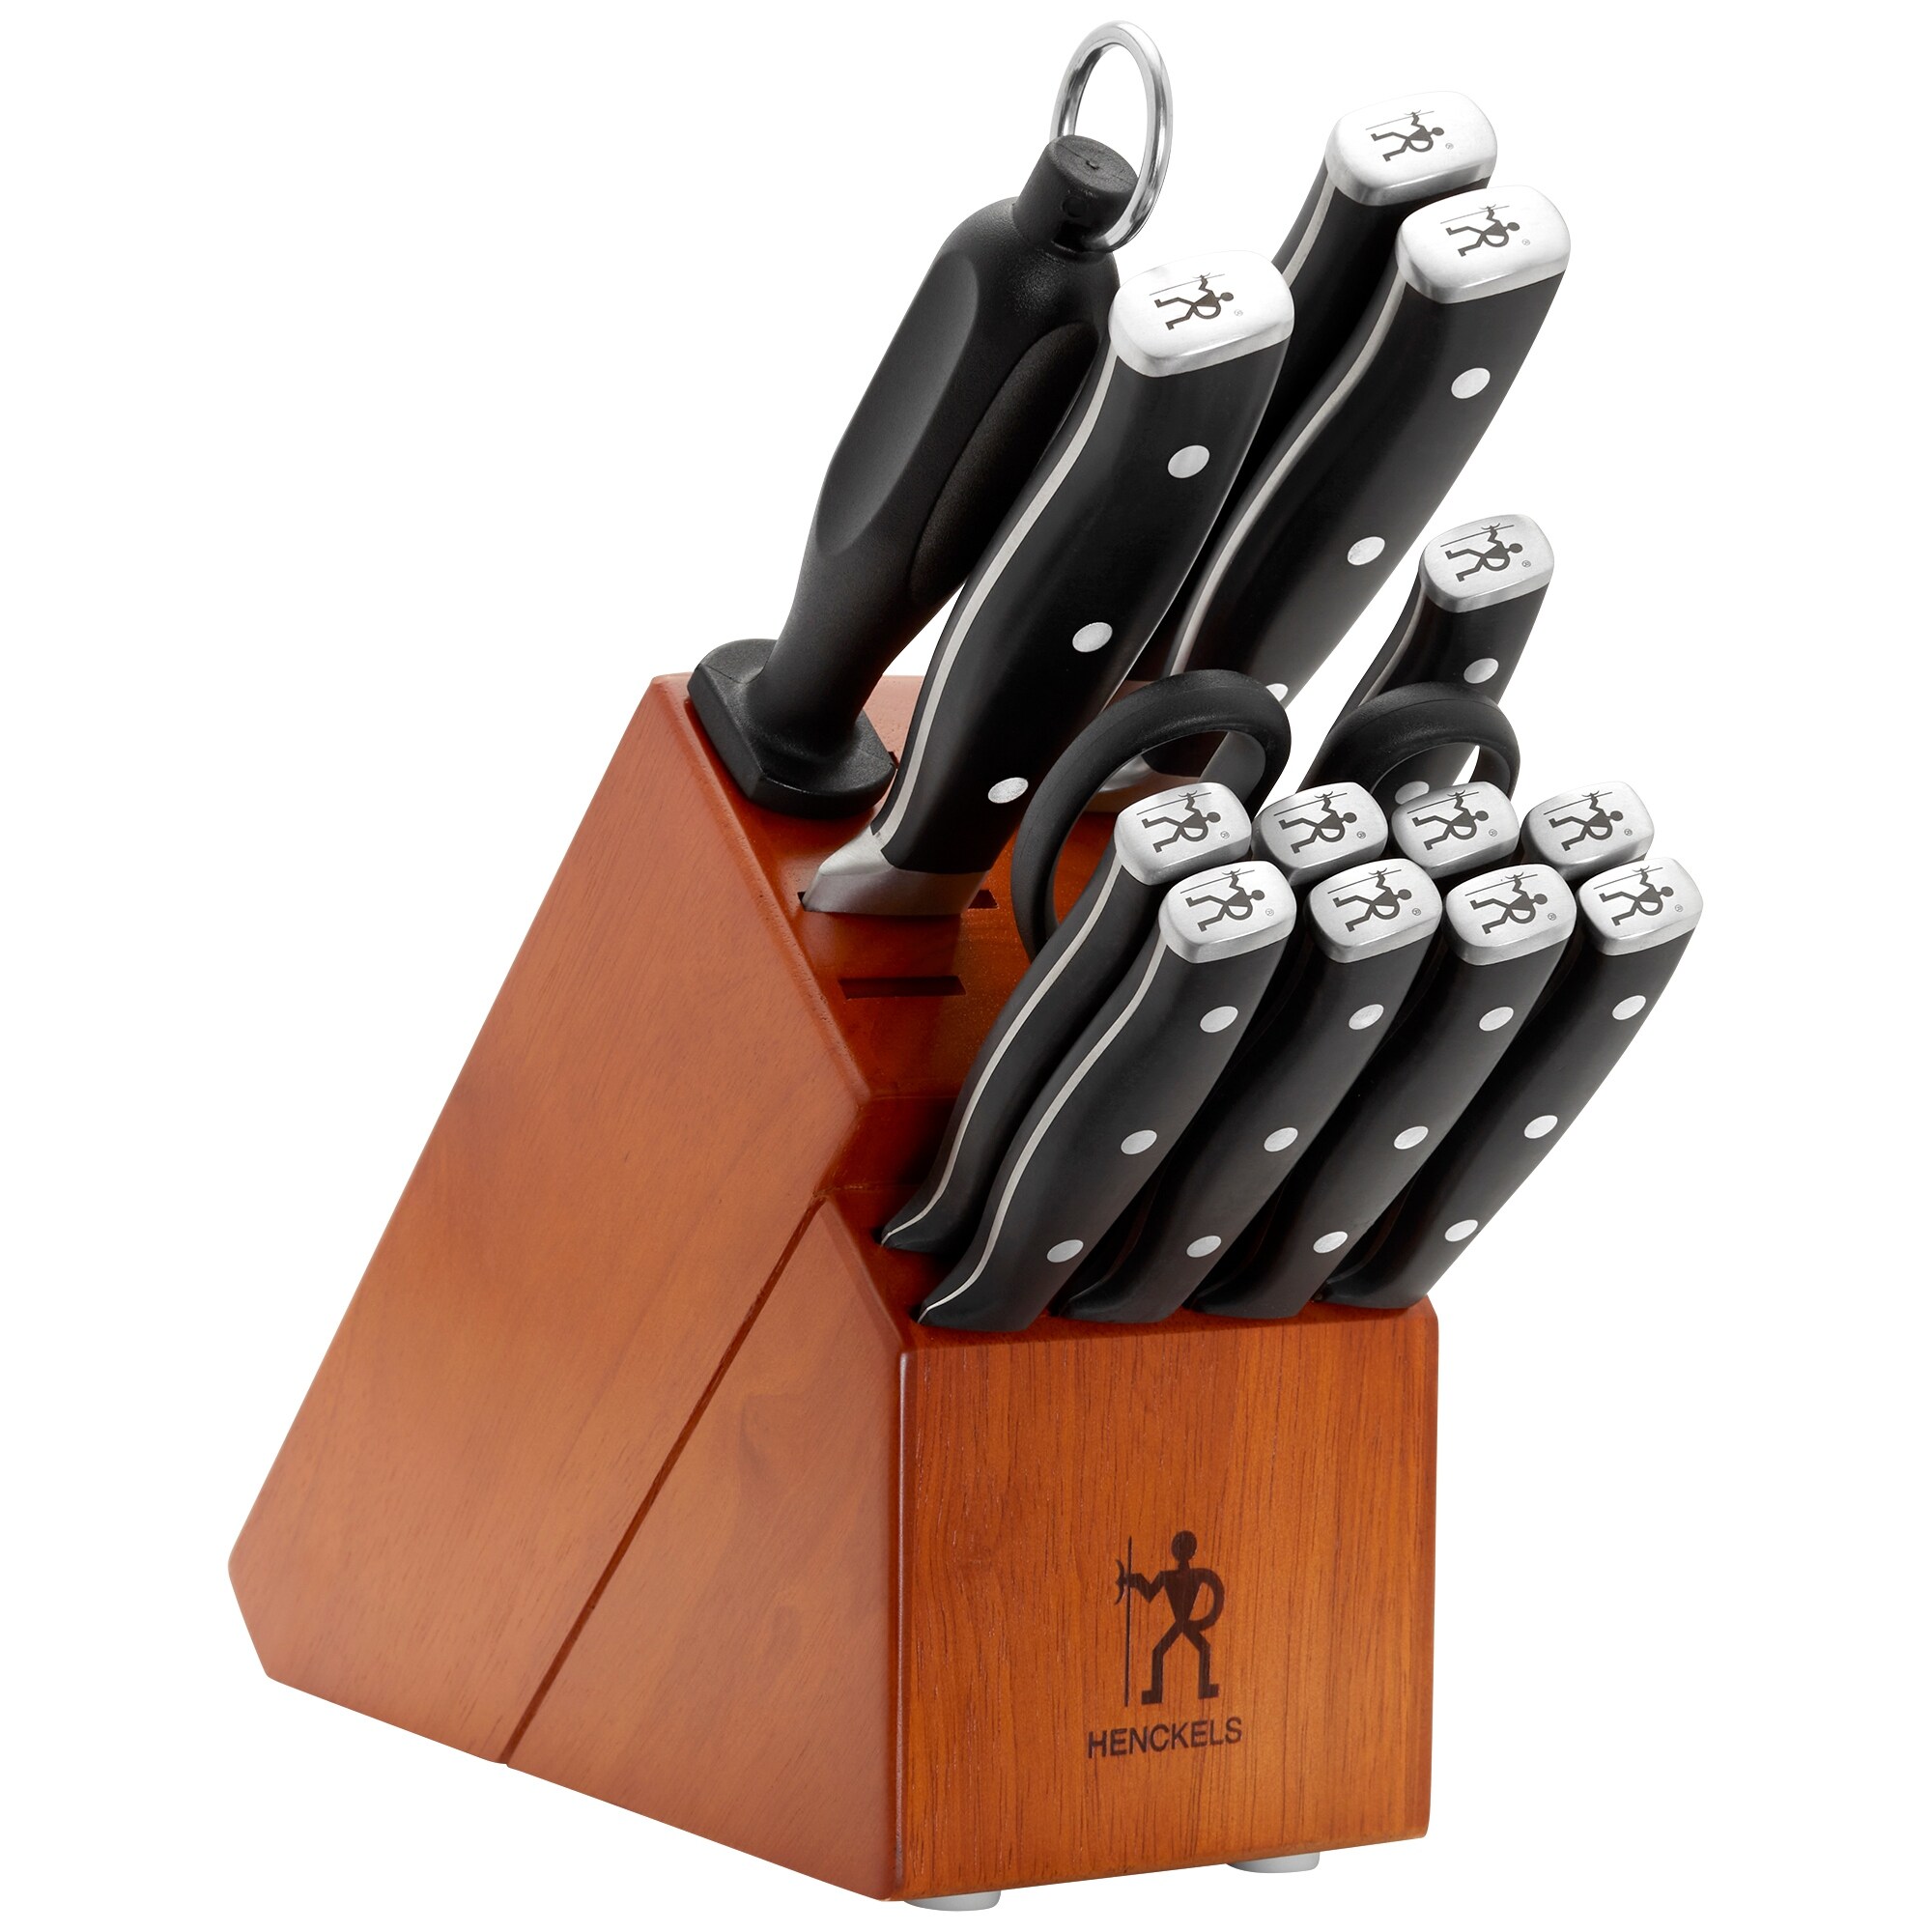 https://ak1.ostkcdn.com/images/products/is/images/direct/fc31e87bf2149d860978cd64f03d37d439a5b205/Henckels-Forged-Accent-15-pc-Knife-Block-Set.jpg